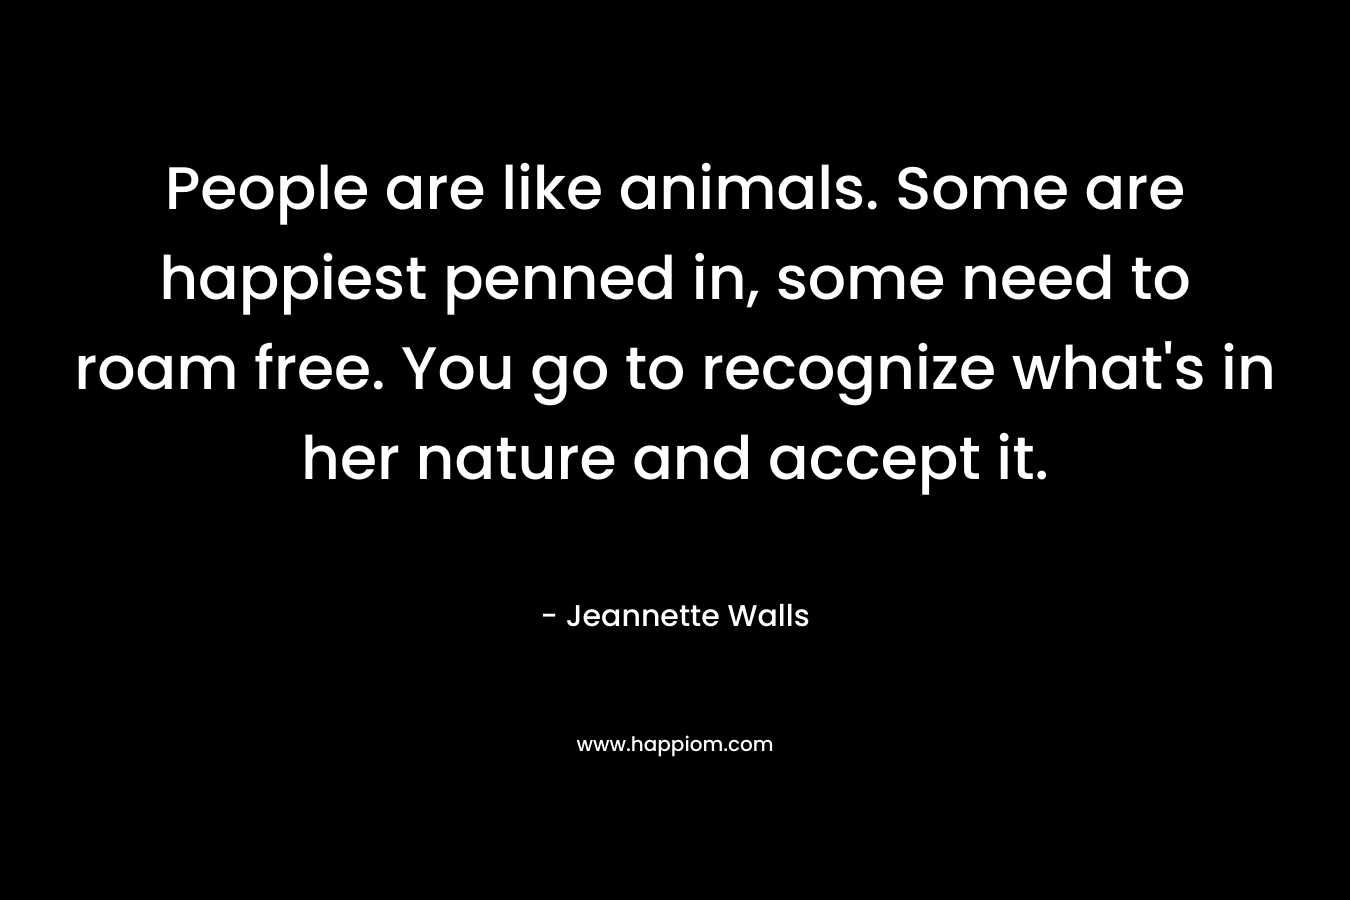 People are like animals. Some are happiest penned in, some need to roam free. You go to recognize what’s in her nature and accept it. – Jeannette Walls